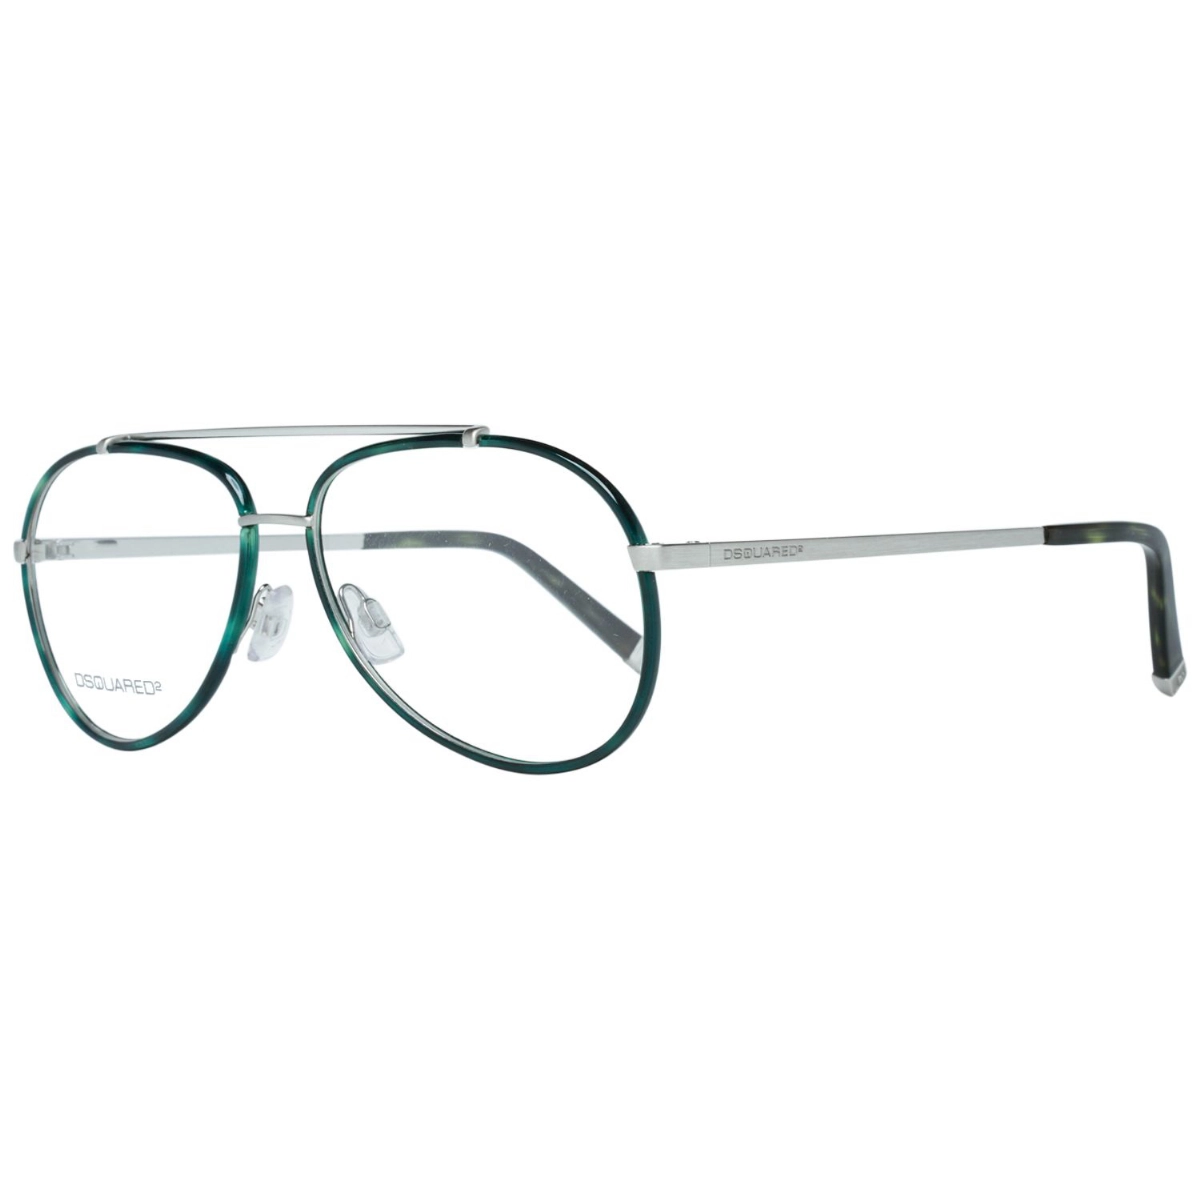 GLASSES FOR WOMAN DSQUARED2 DQ5072-020-54